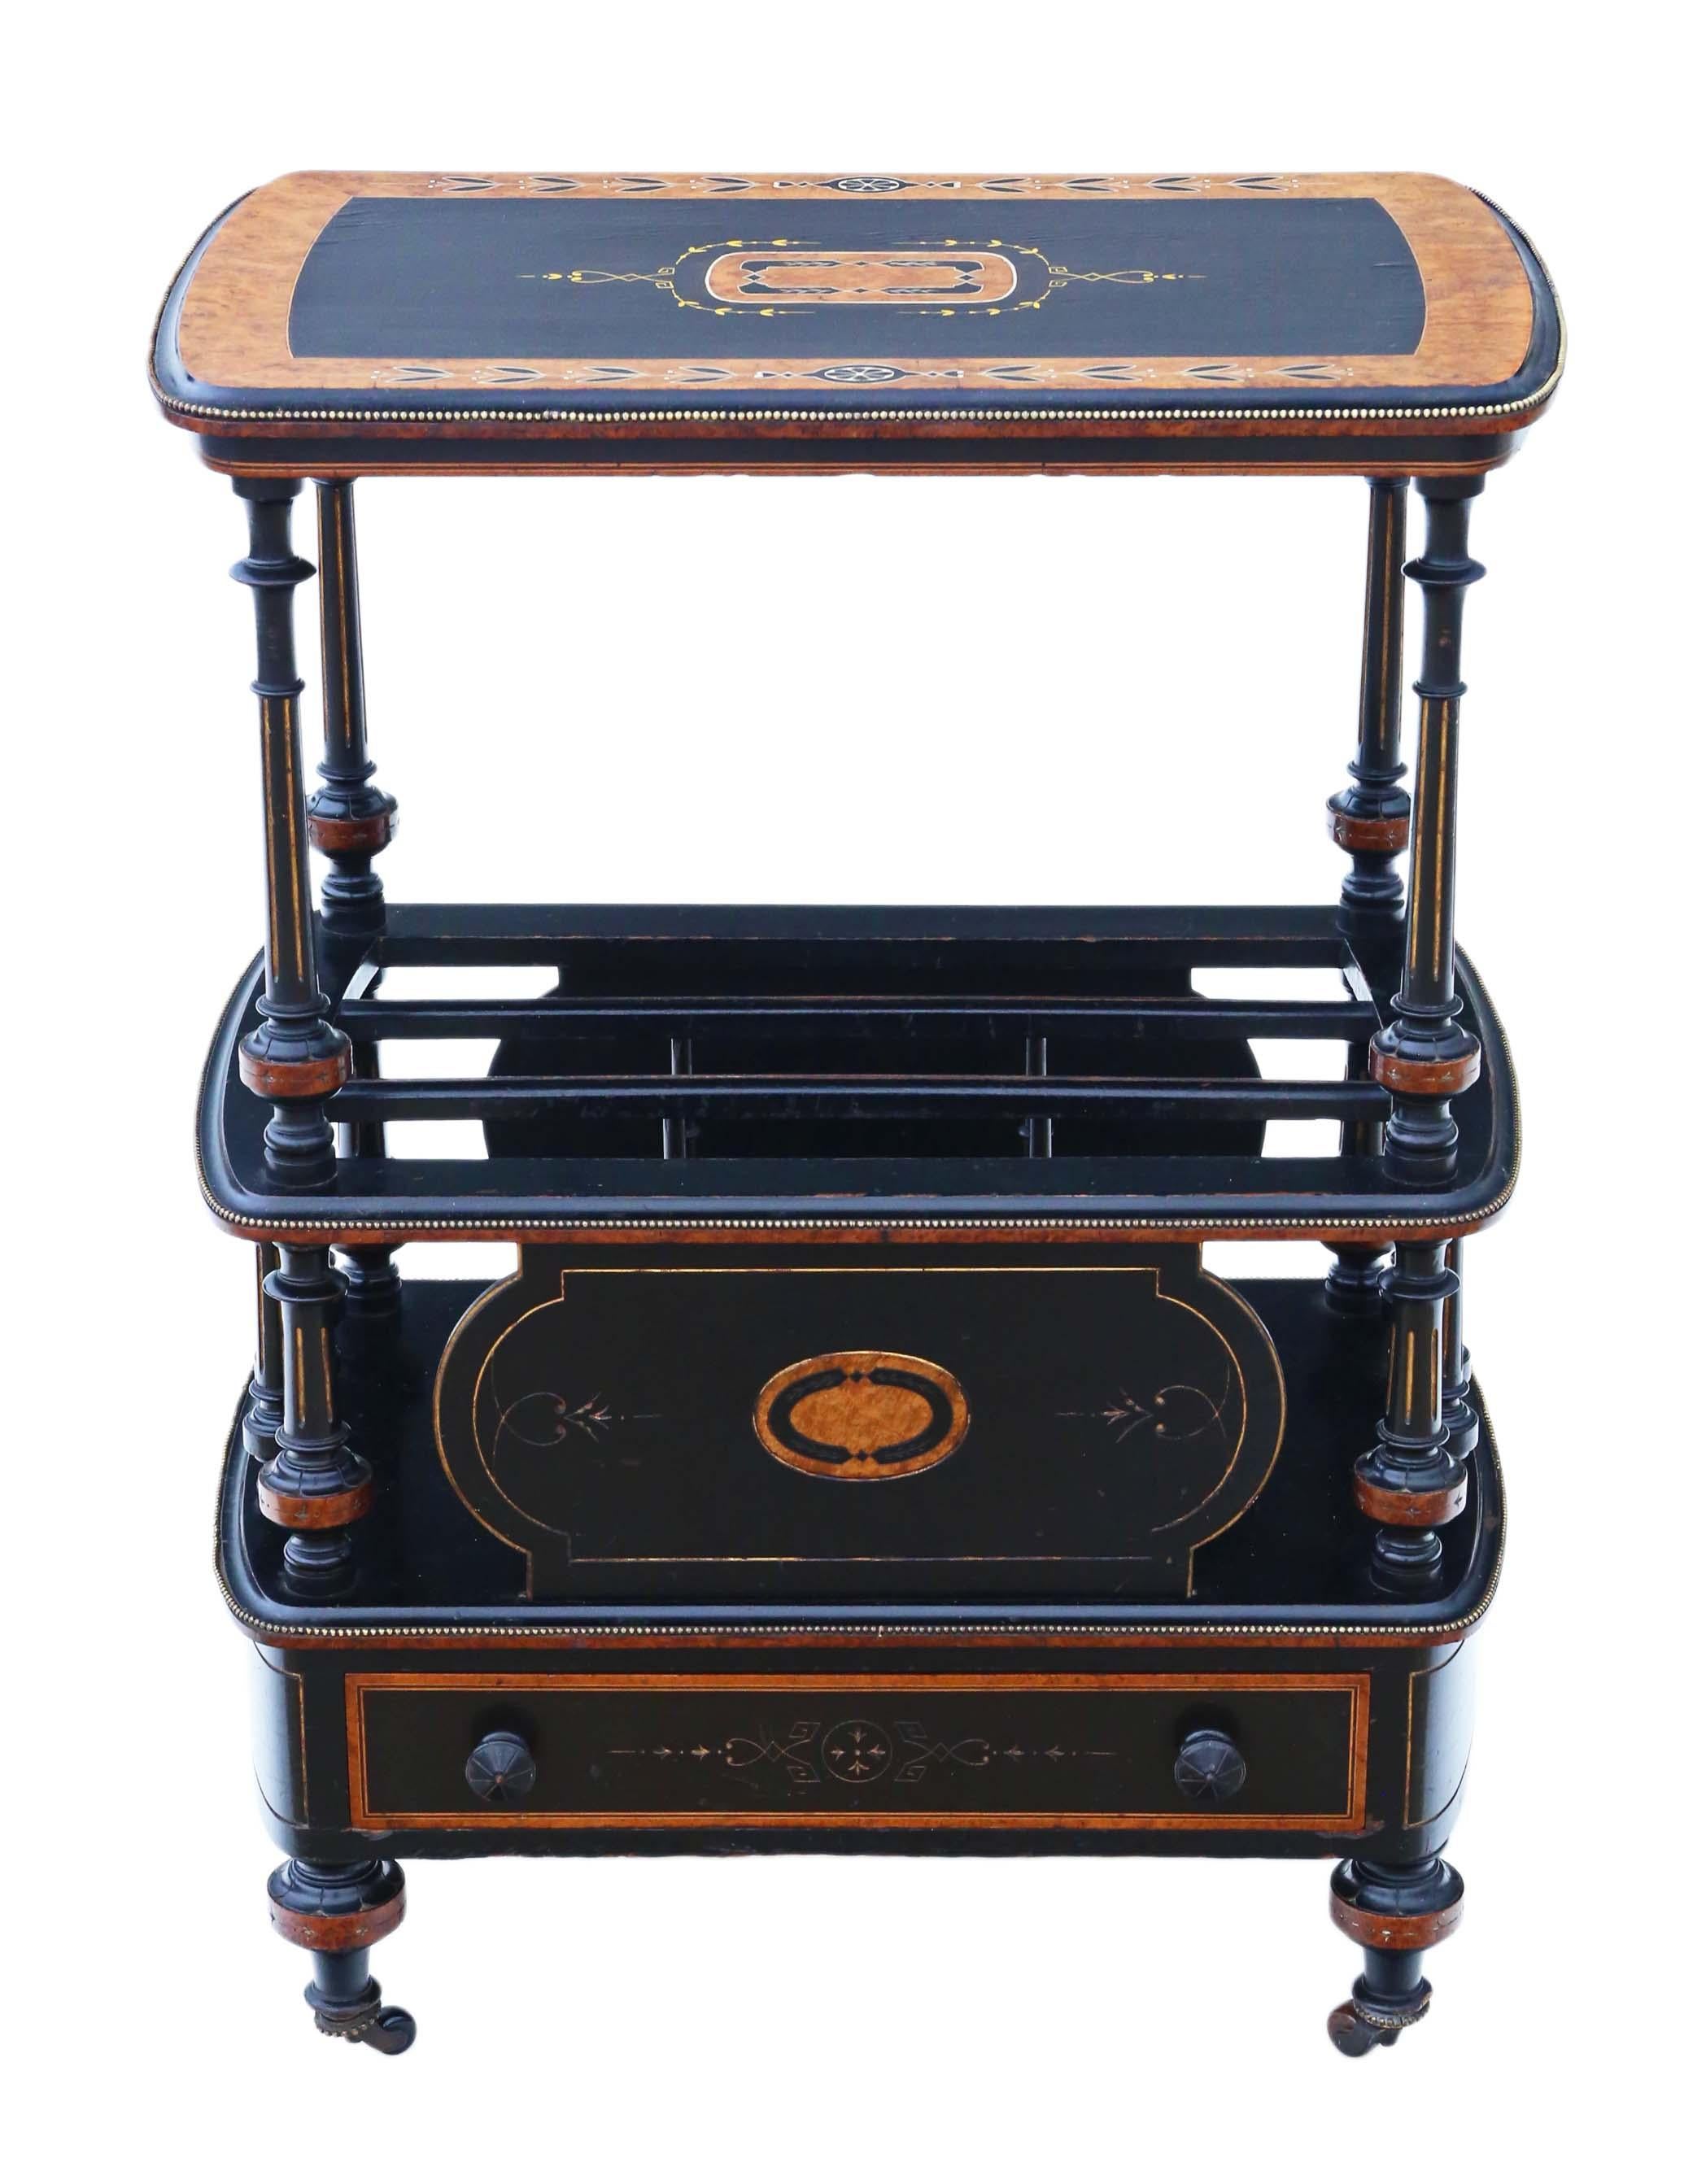 Antique quality Victorian Aesthetic circa 1880 ebonised with inlaid amboyna and brass edging Canterbury whatnot.
This is a lovely item, that is full of age, charm and character.
An attractive and rare quality piece, with a lovely decorative